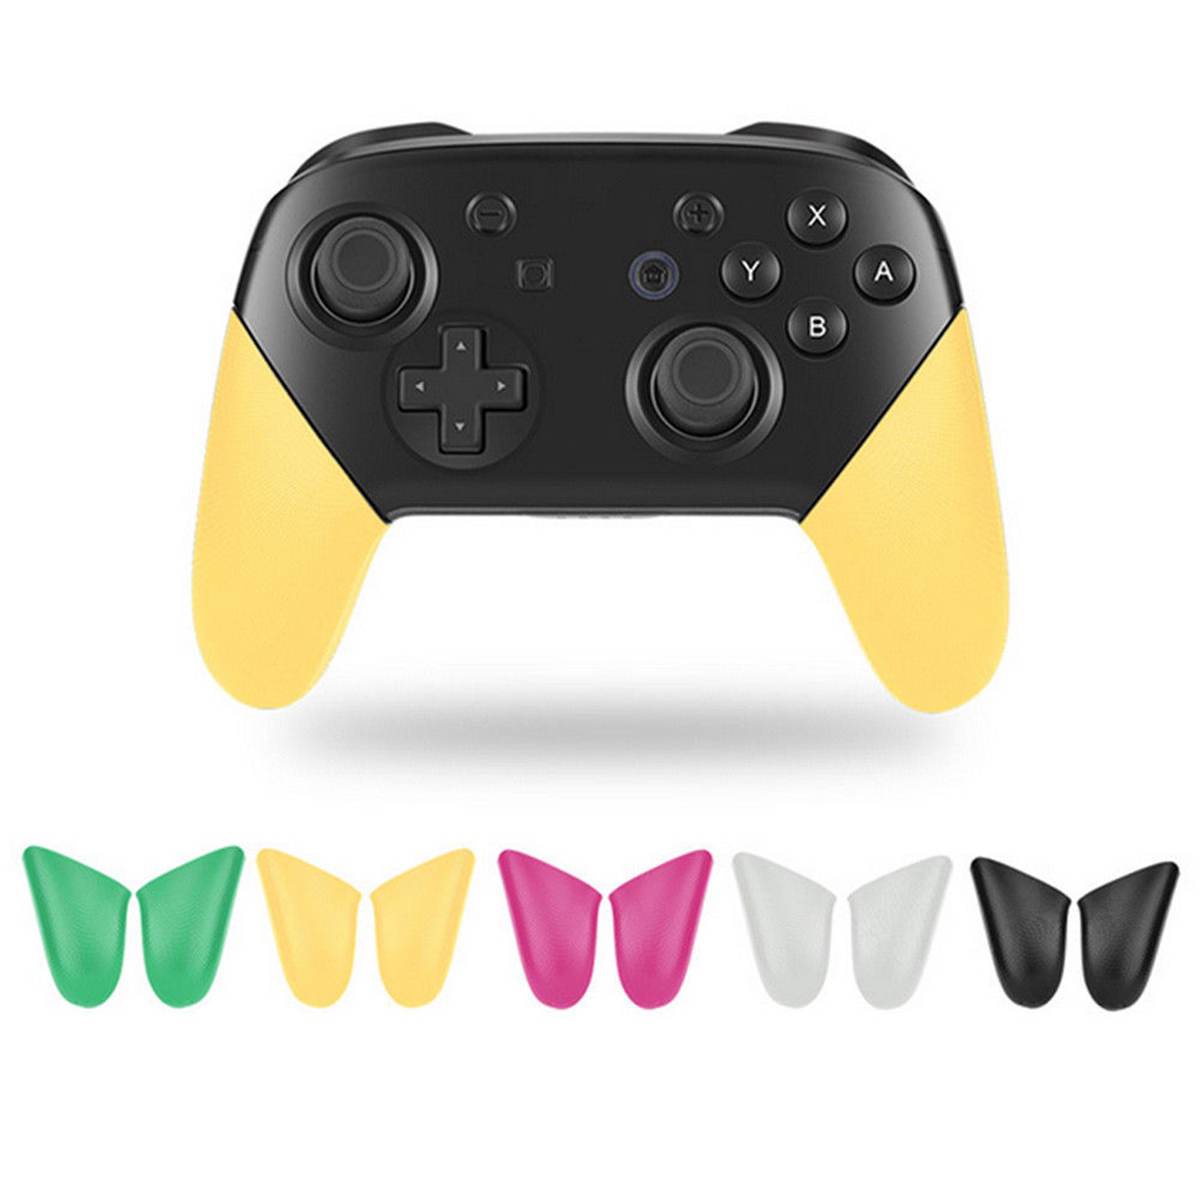 Replacement Grip Handle Protection Solid Shell Skidproof Holder For Nintendo Switch Pro Gamepad Controller 12